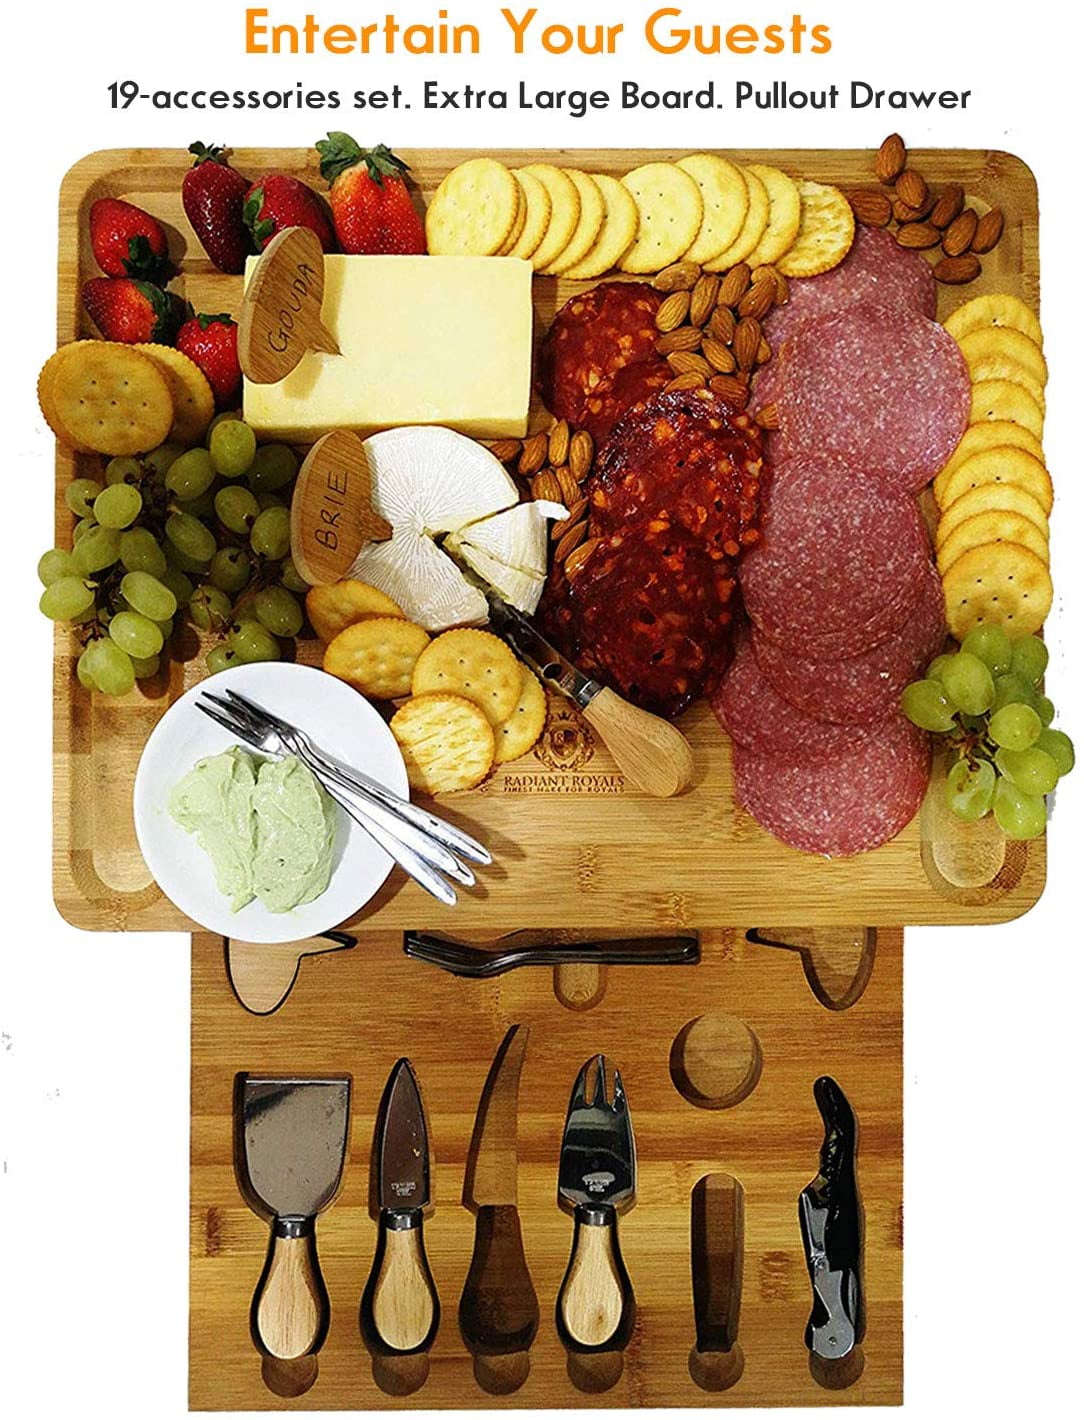 Serving Forks Men Women Birthday Markers and Wine Accessories Thanksgiving Gift Extra Large Cheese Plate Board with Hidden Magnetic Drawer holding Cheese Knives Unique Housewarming Gifts